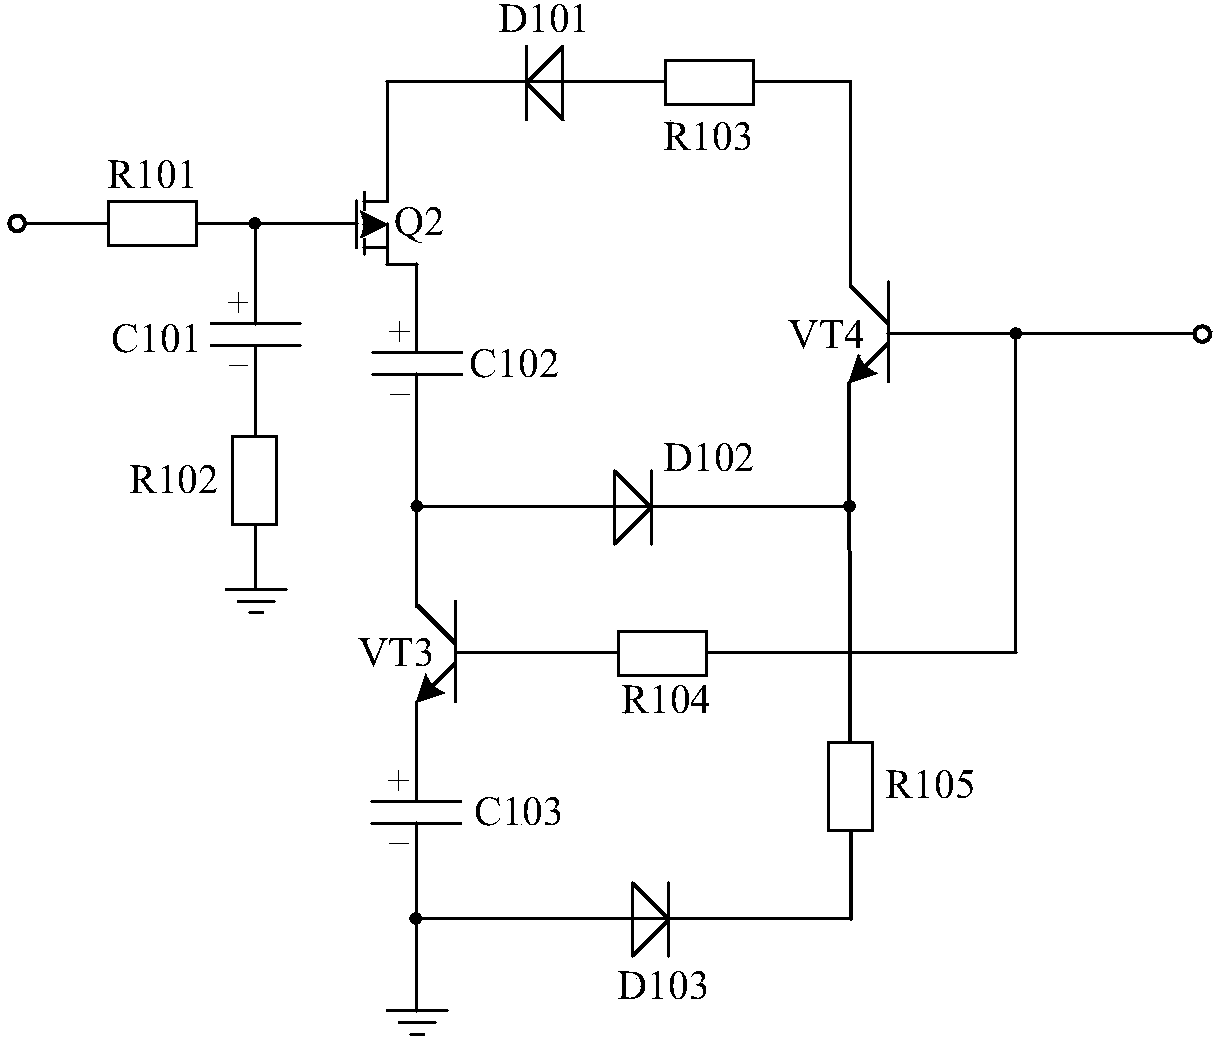 Power supply circuit for LED